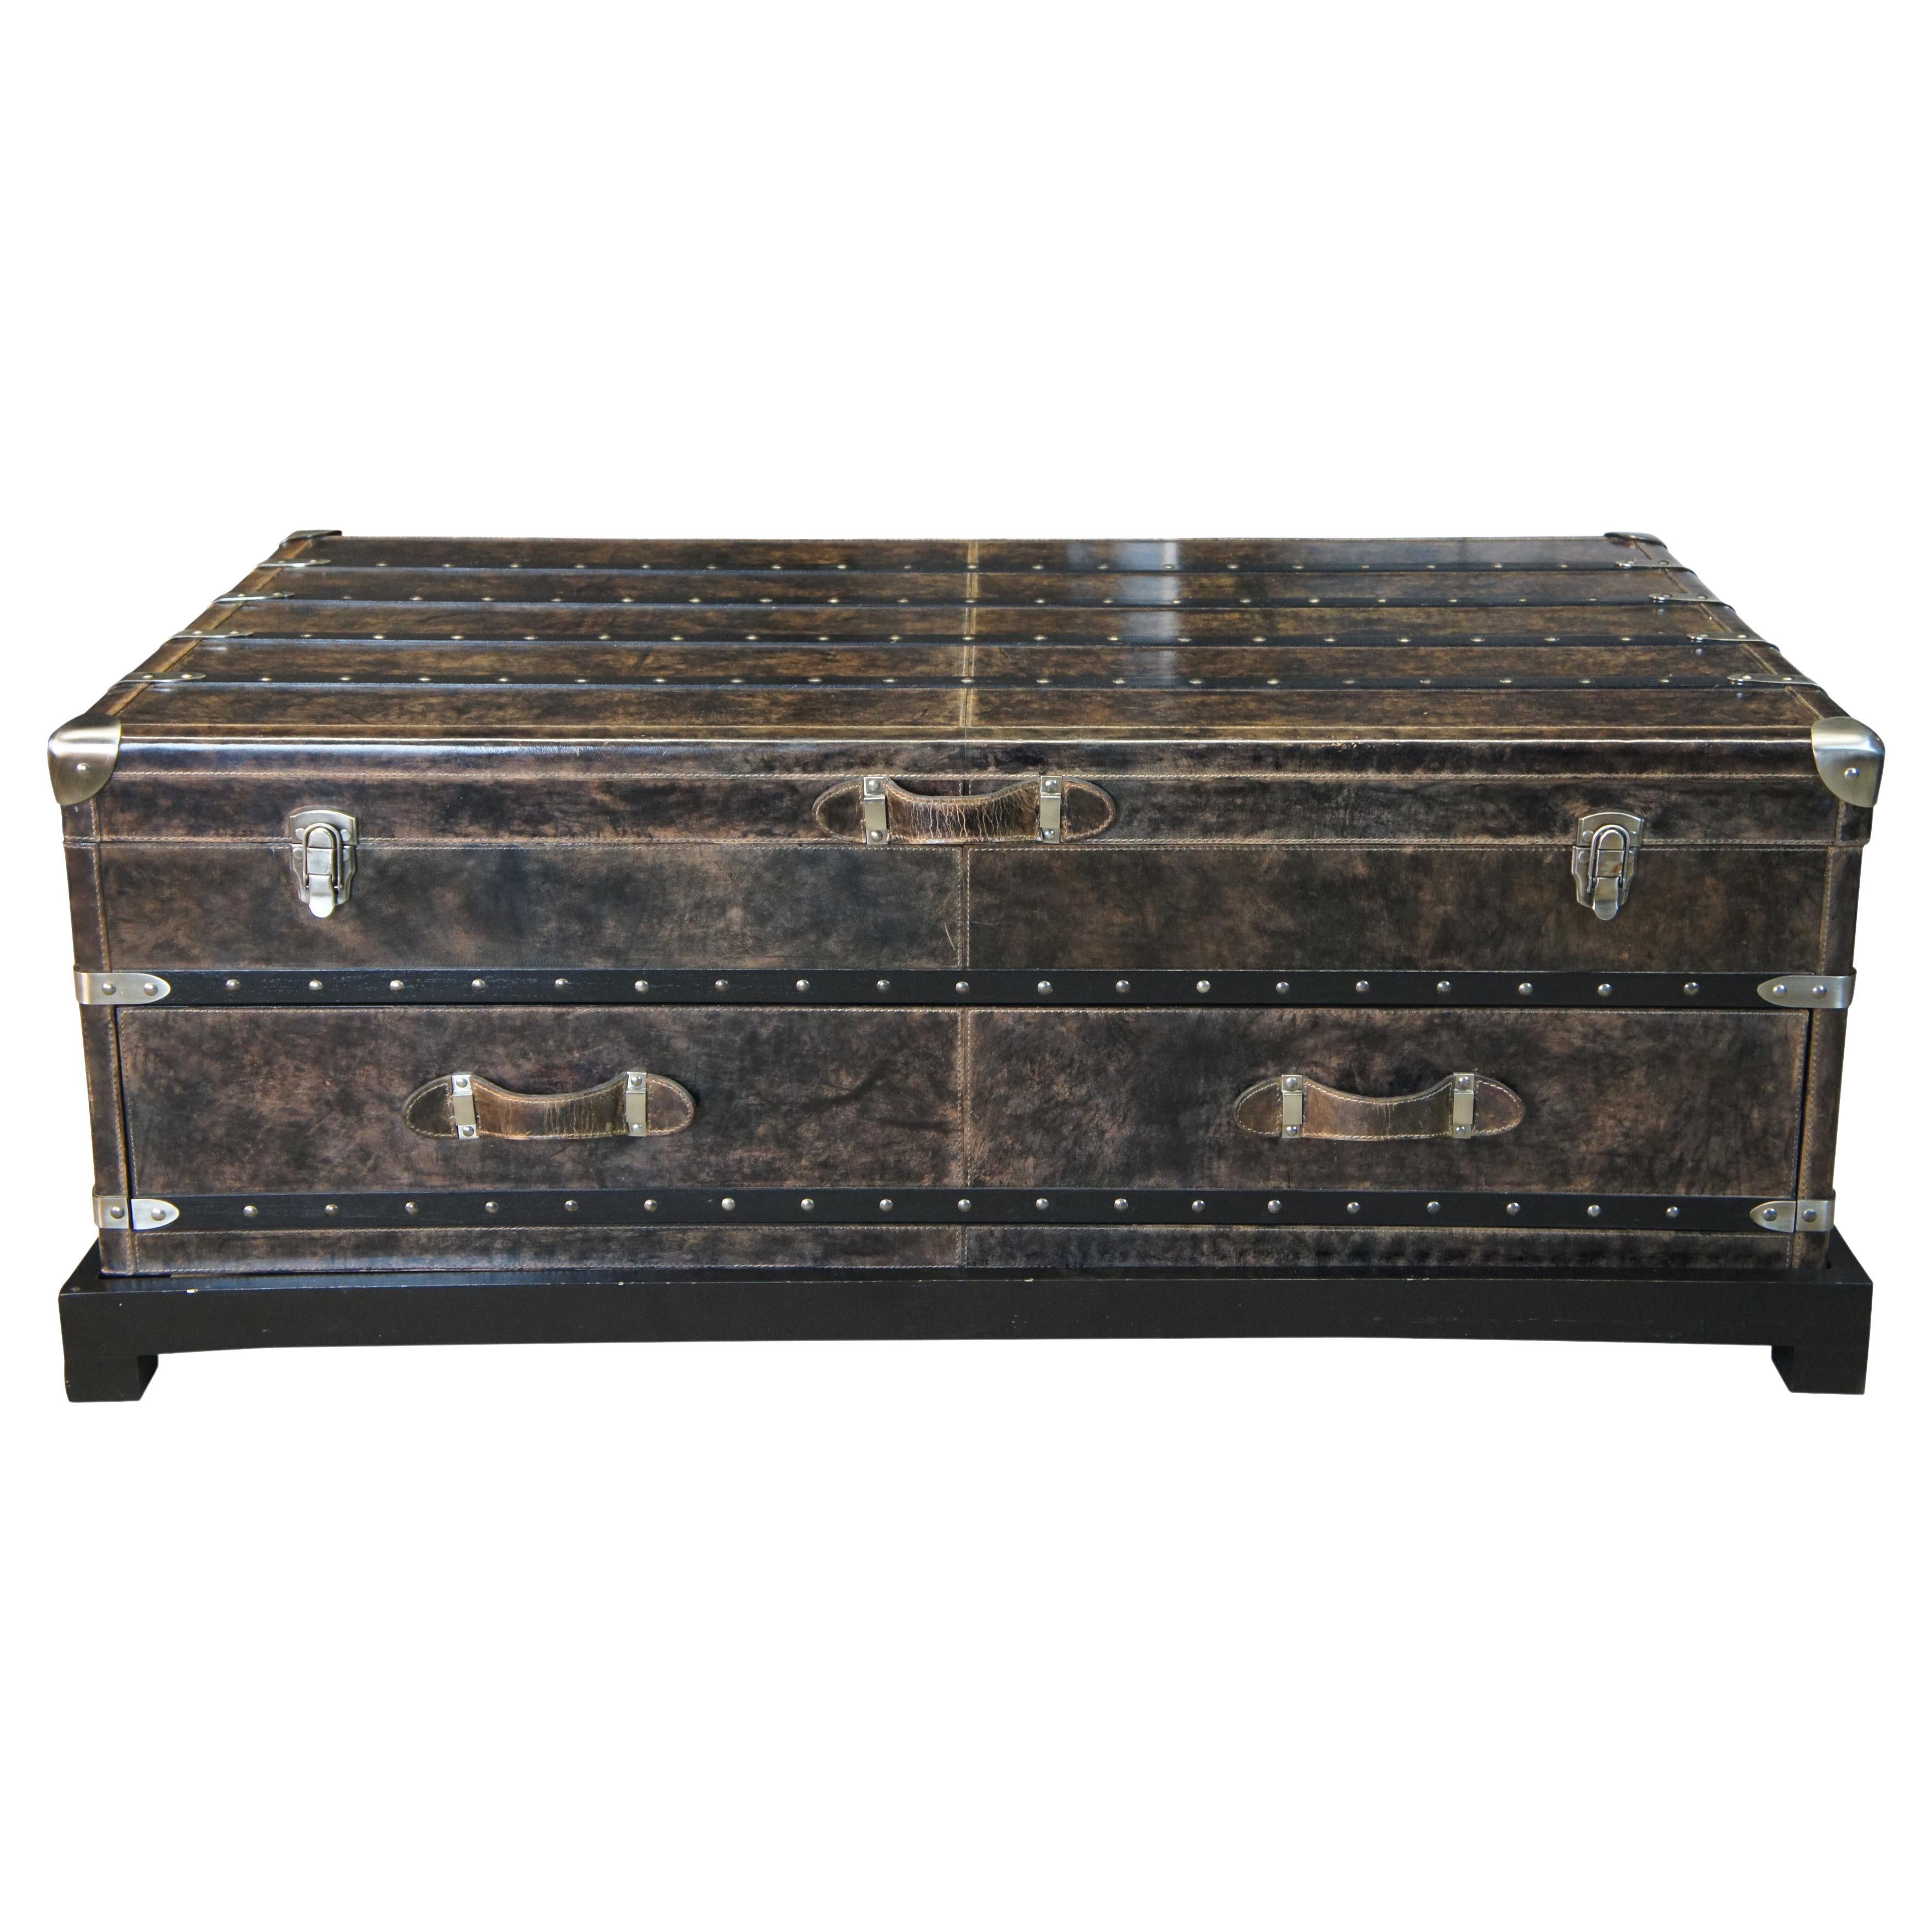 Arhaus Martin Leather Steamer Trunk Coffee Cocktail Table with Drawers on Stand 